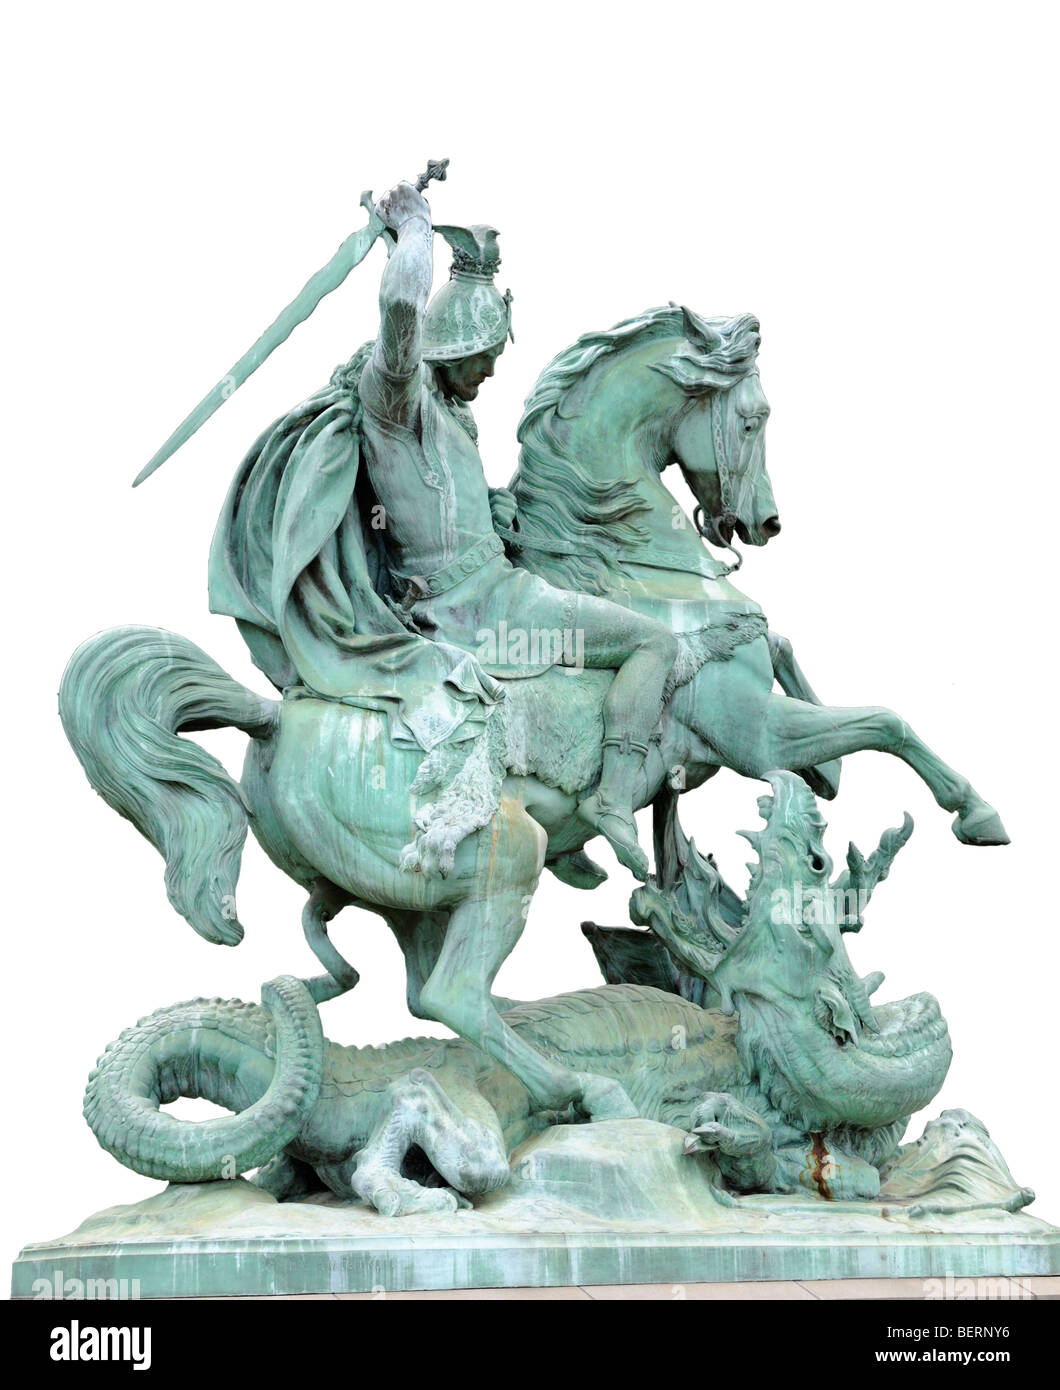 Zagreb, Croatia. Statue of St George and the Dragon in Trg marsala Tita (Marshal Tito Square) in front of National Theatre Stock Photo